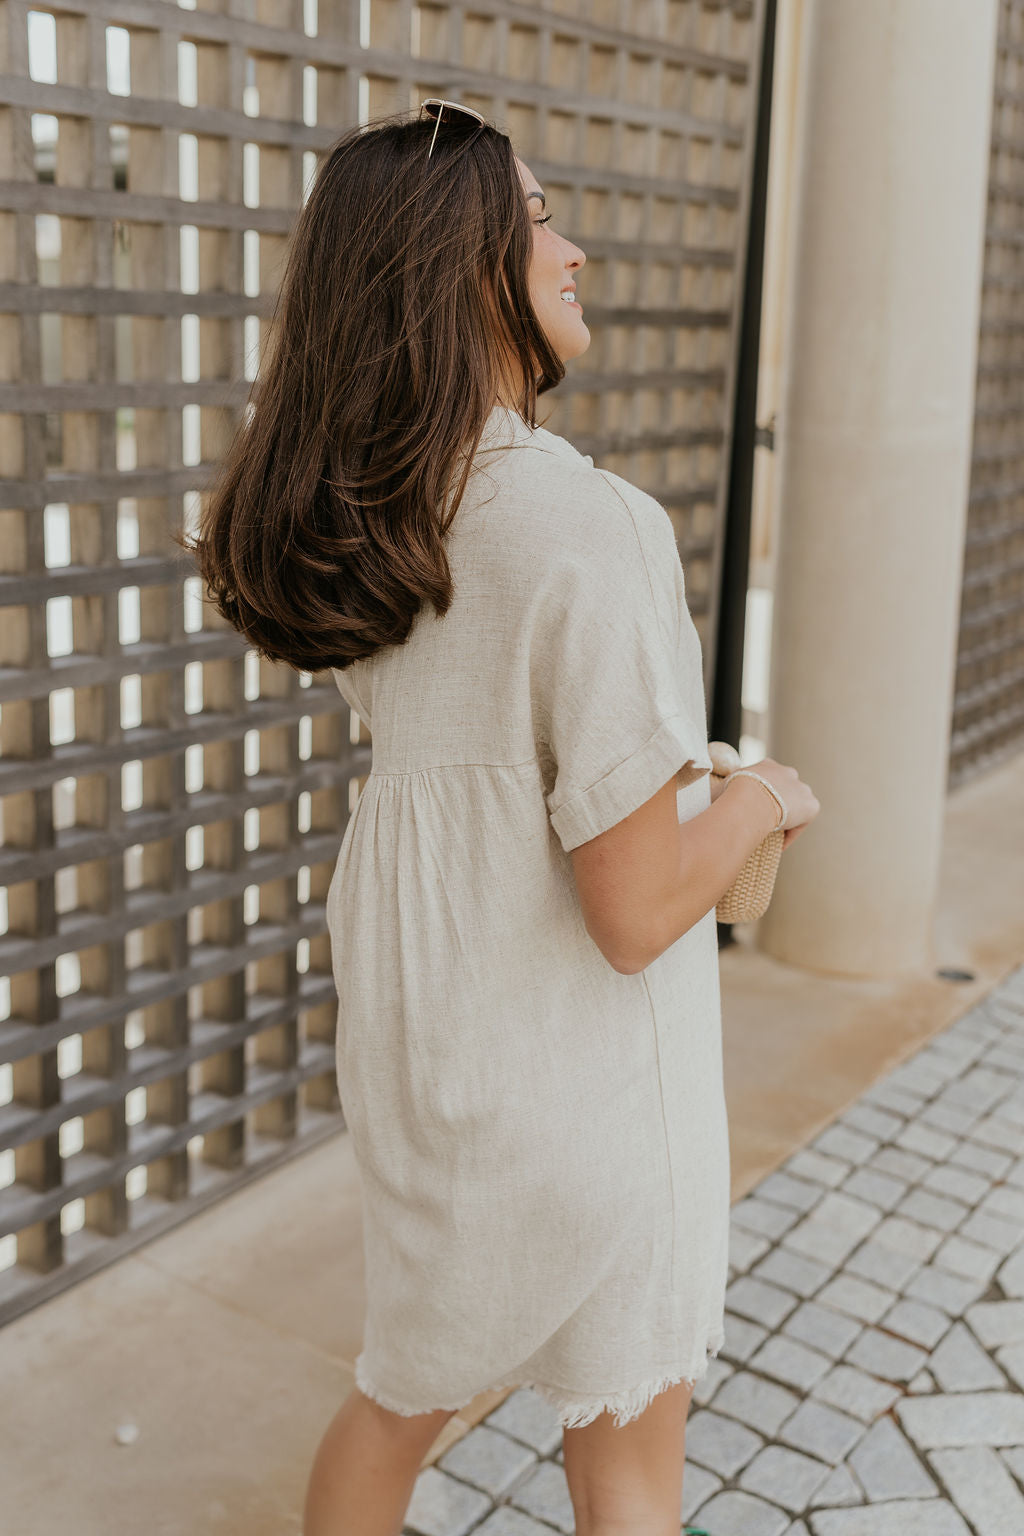 Back side view of female model wearing the Juliette Linen Fray Mini Dress which features Linen Lightweight Fabric, Fray Hem Details, V-Neckline with a Collar and Folded Short Sleeves